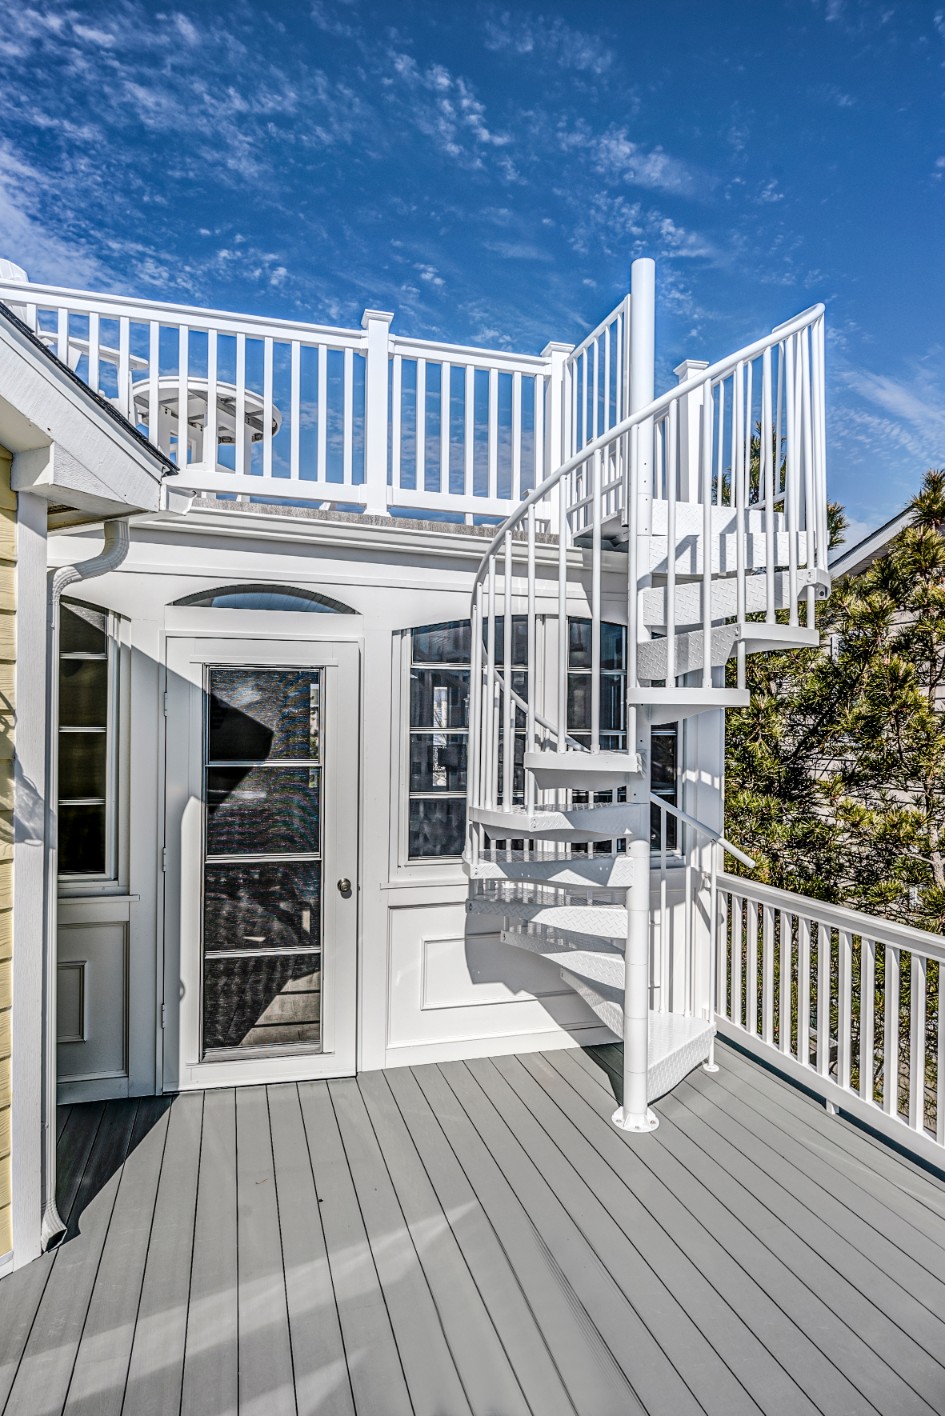 Indian Street Sunroom in Bethany Beach DE - Deck with Spiral Staircase next to Sunroom